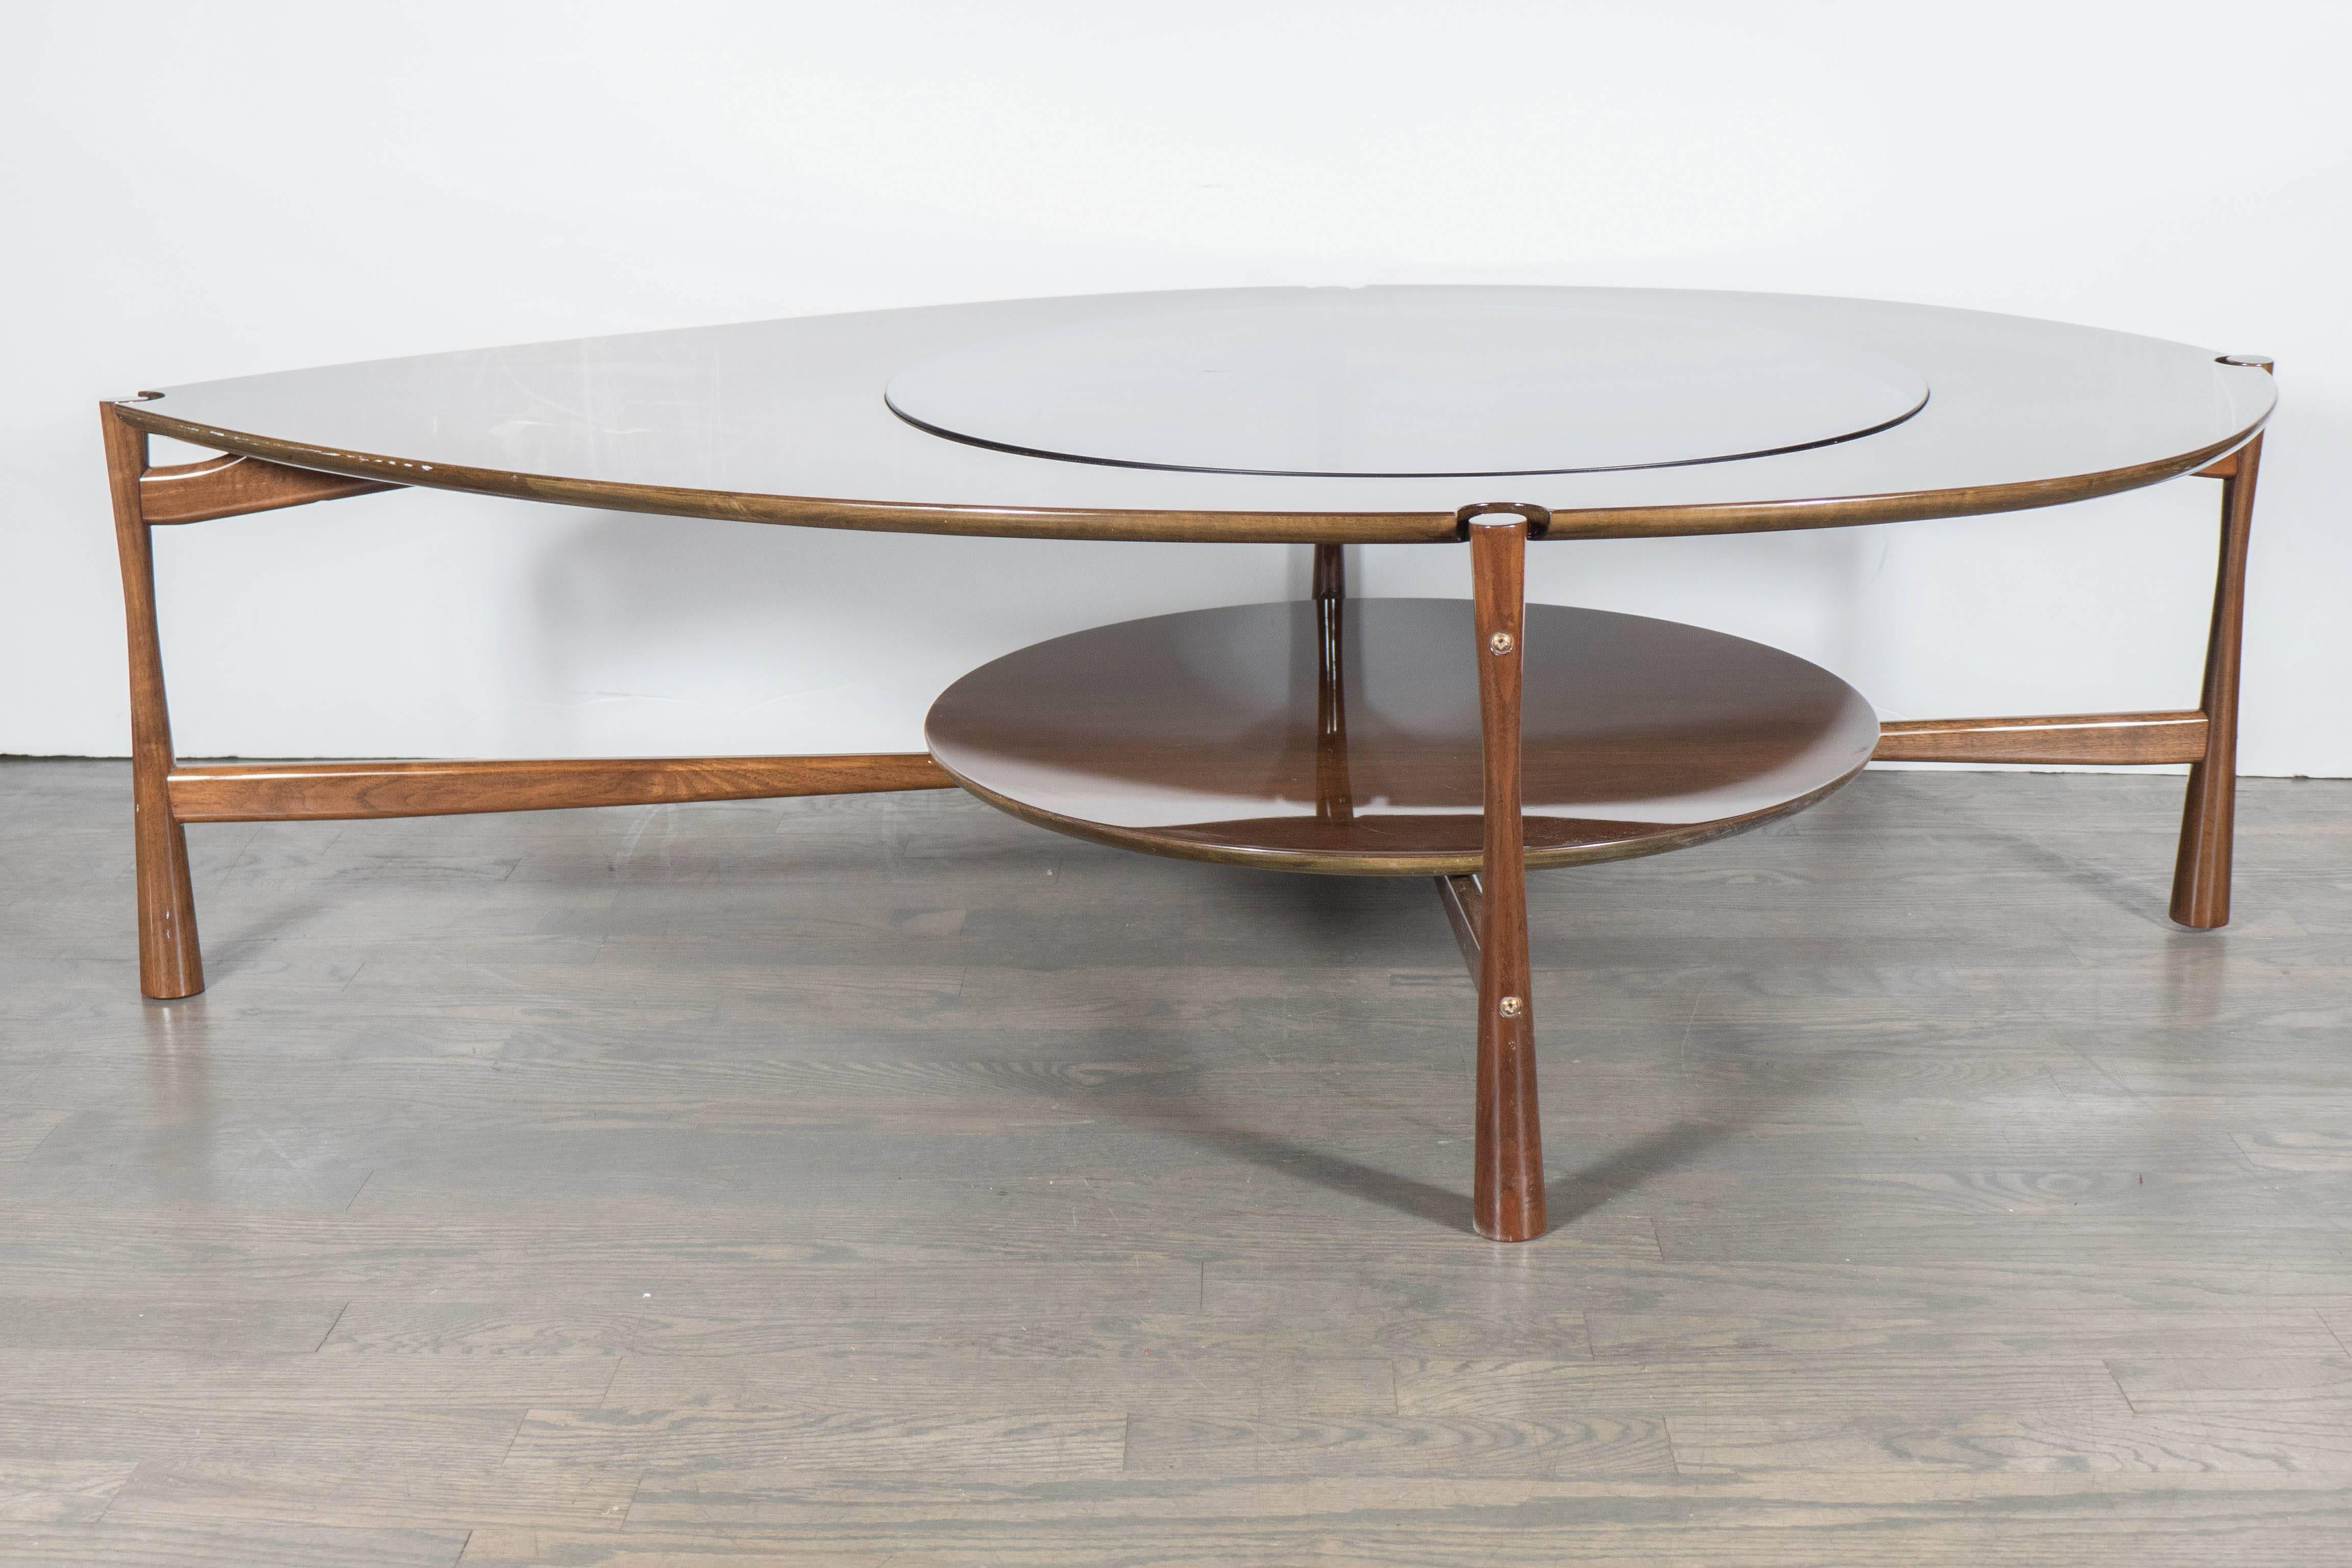 This sculptural Mid-Century Modernist cocktail table features a two-tier design in walnut, the top tier being a large tear drop shape with inset smoked glass center positioned directly over the circular lower tier, the two tiers are supported by